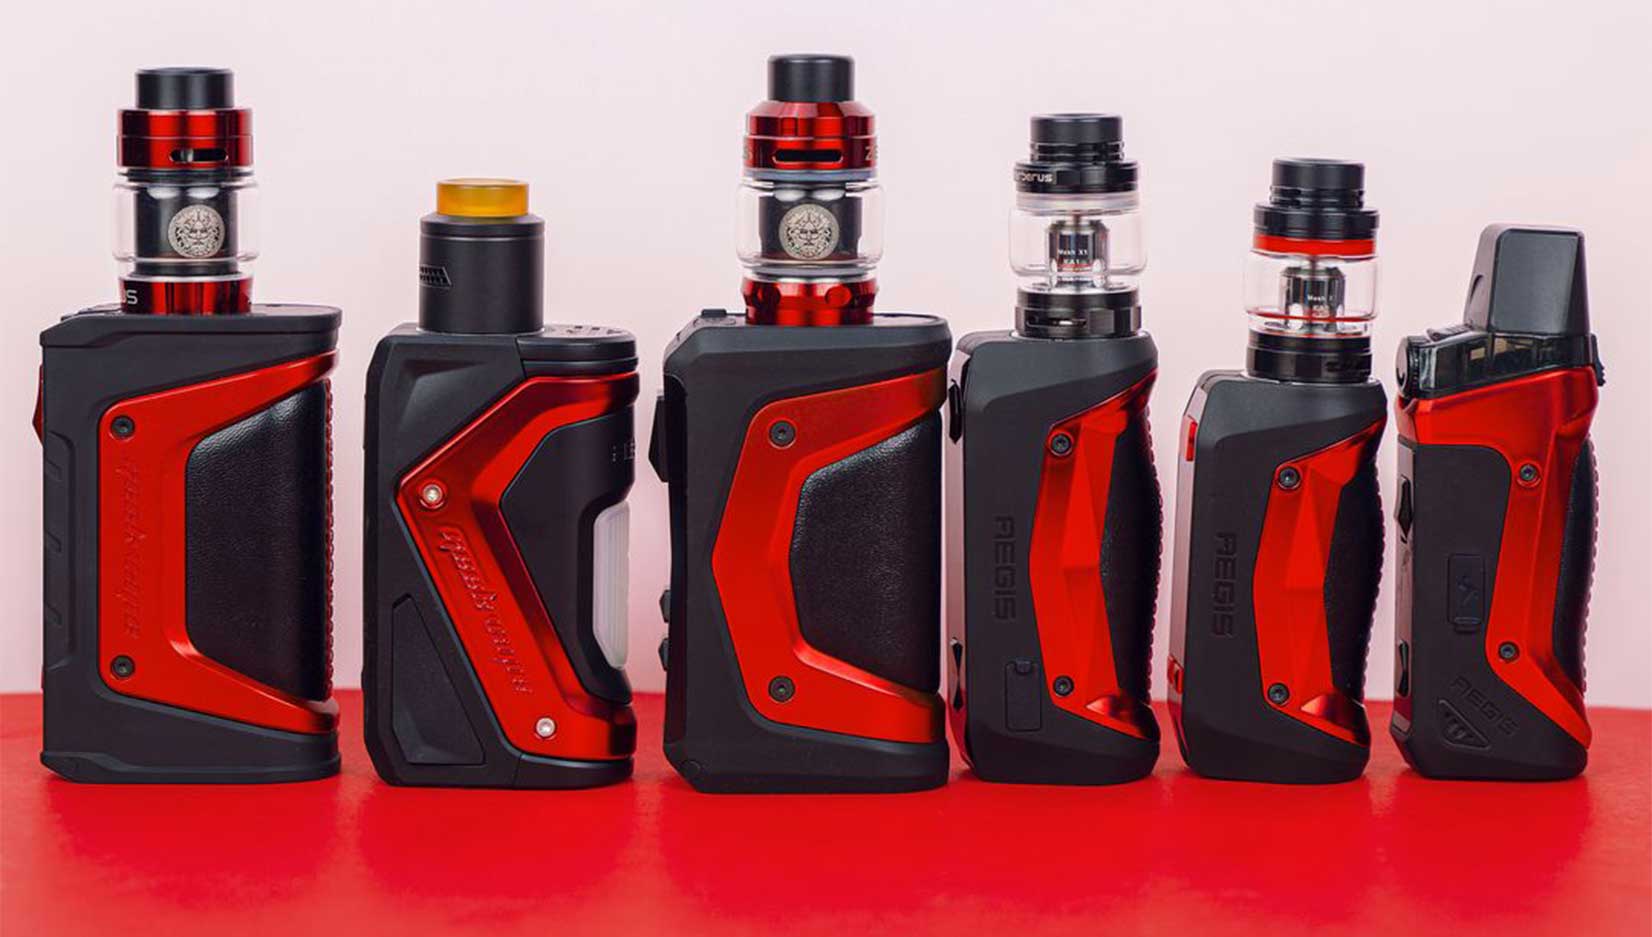 Selecting you first vape, What should you be considering?